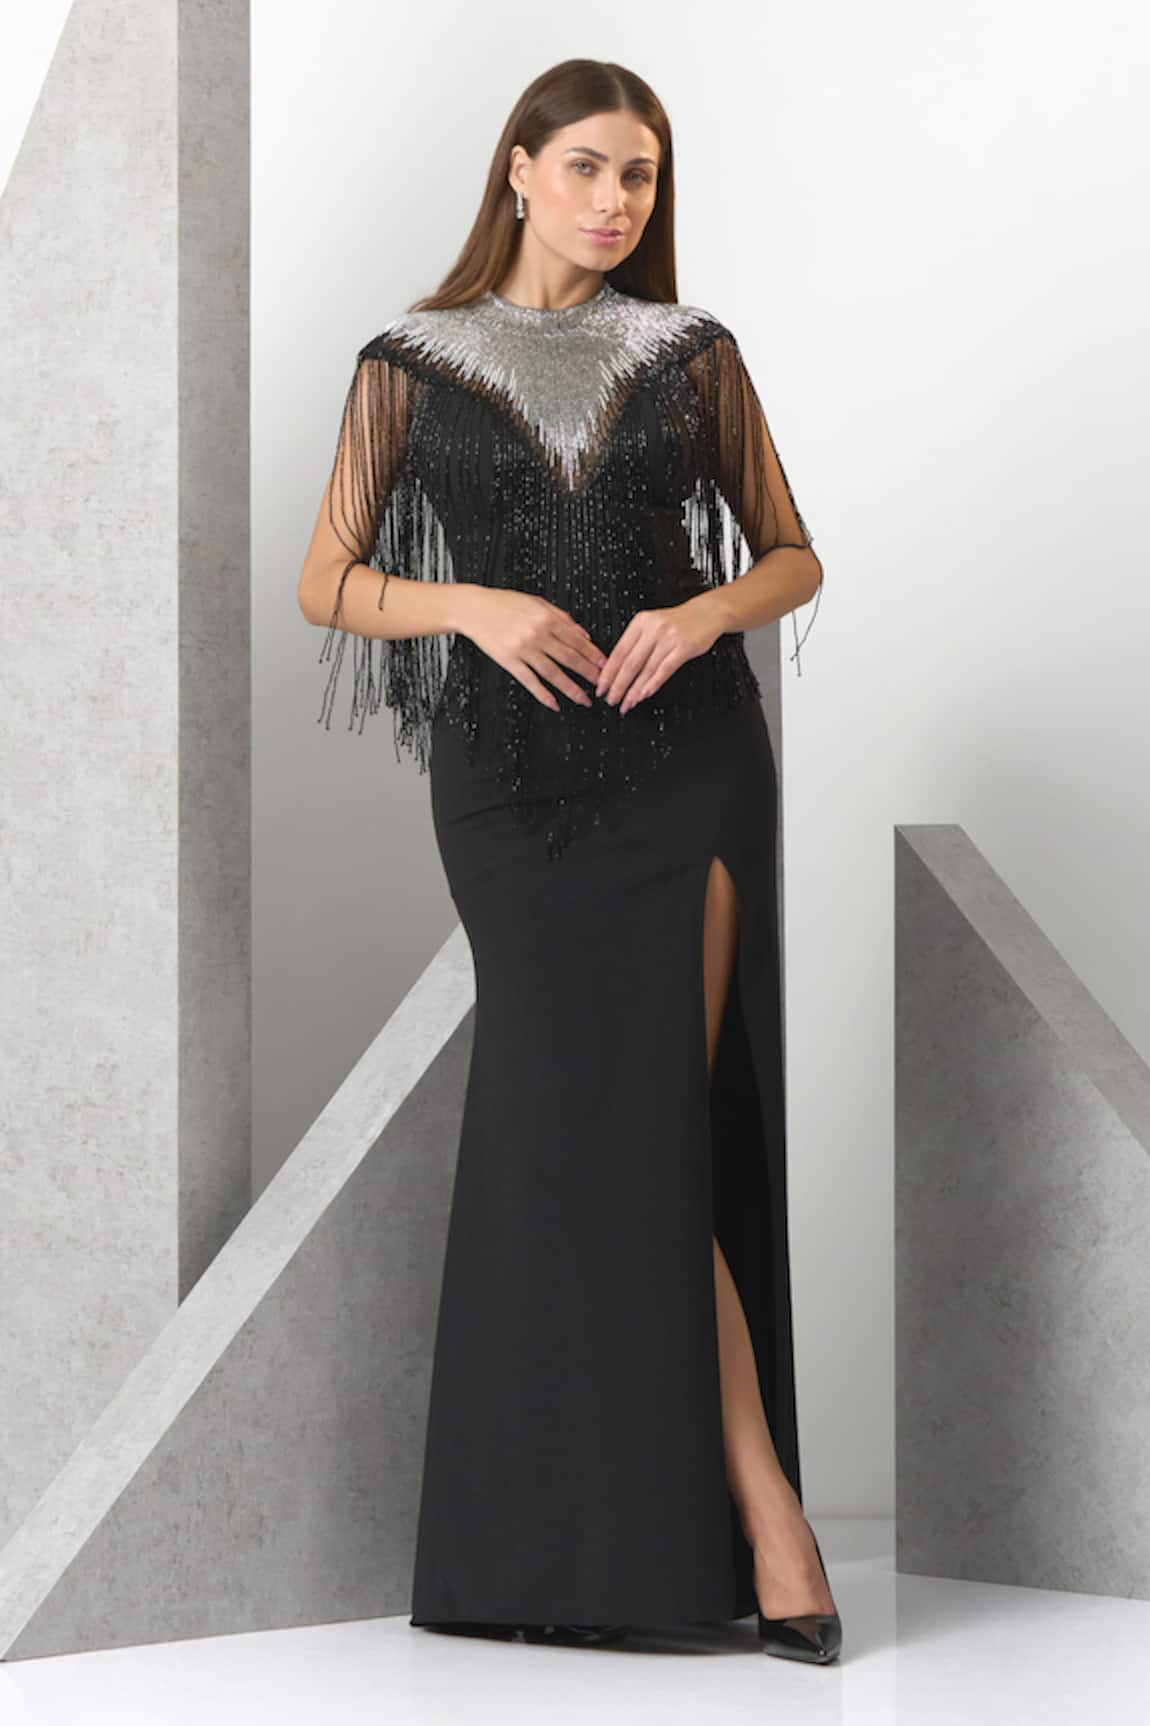 Eli Bitton Beads Hand Embroidered Gown